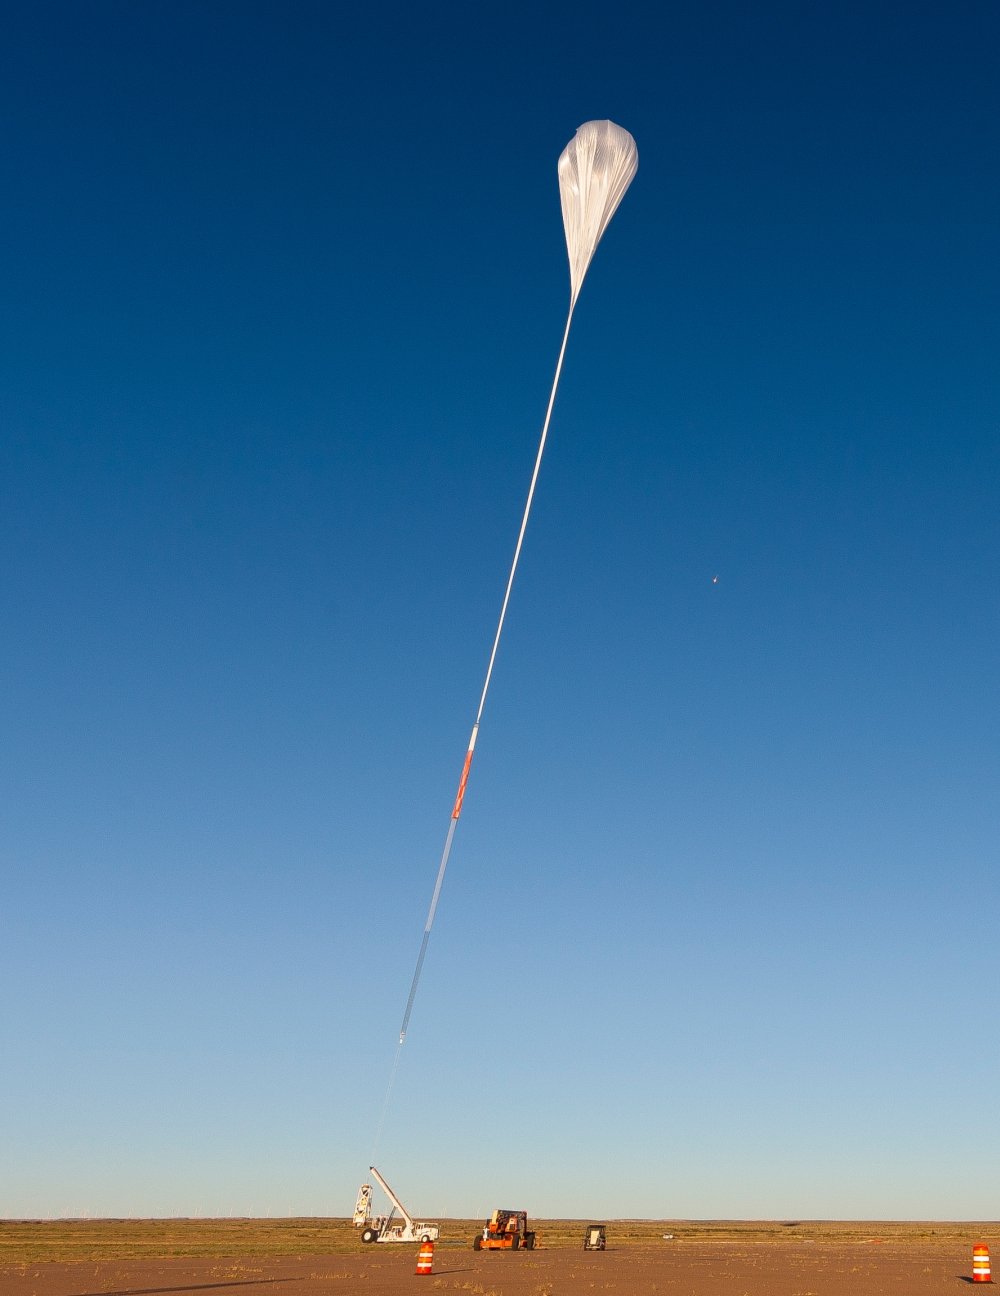 Balloon ascending to take the payload from the Big Bill launch vehicle (picture: NASA/JHUAPL)